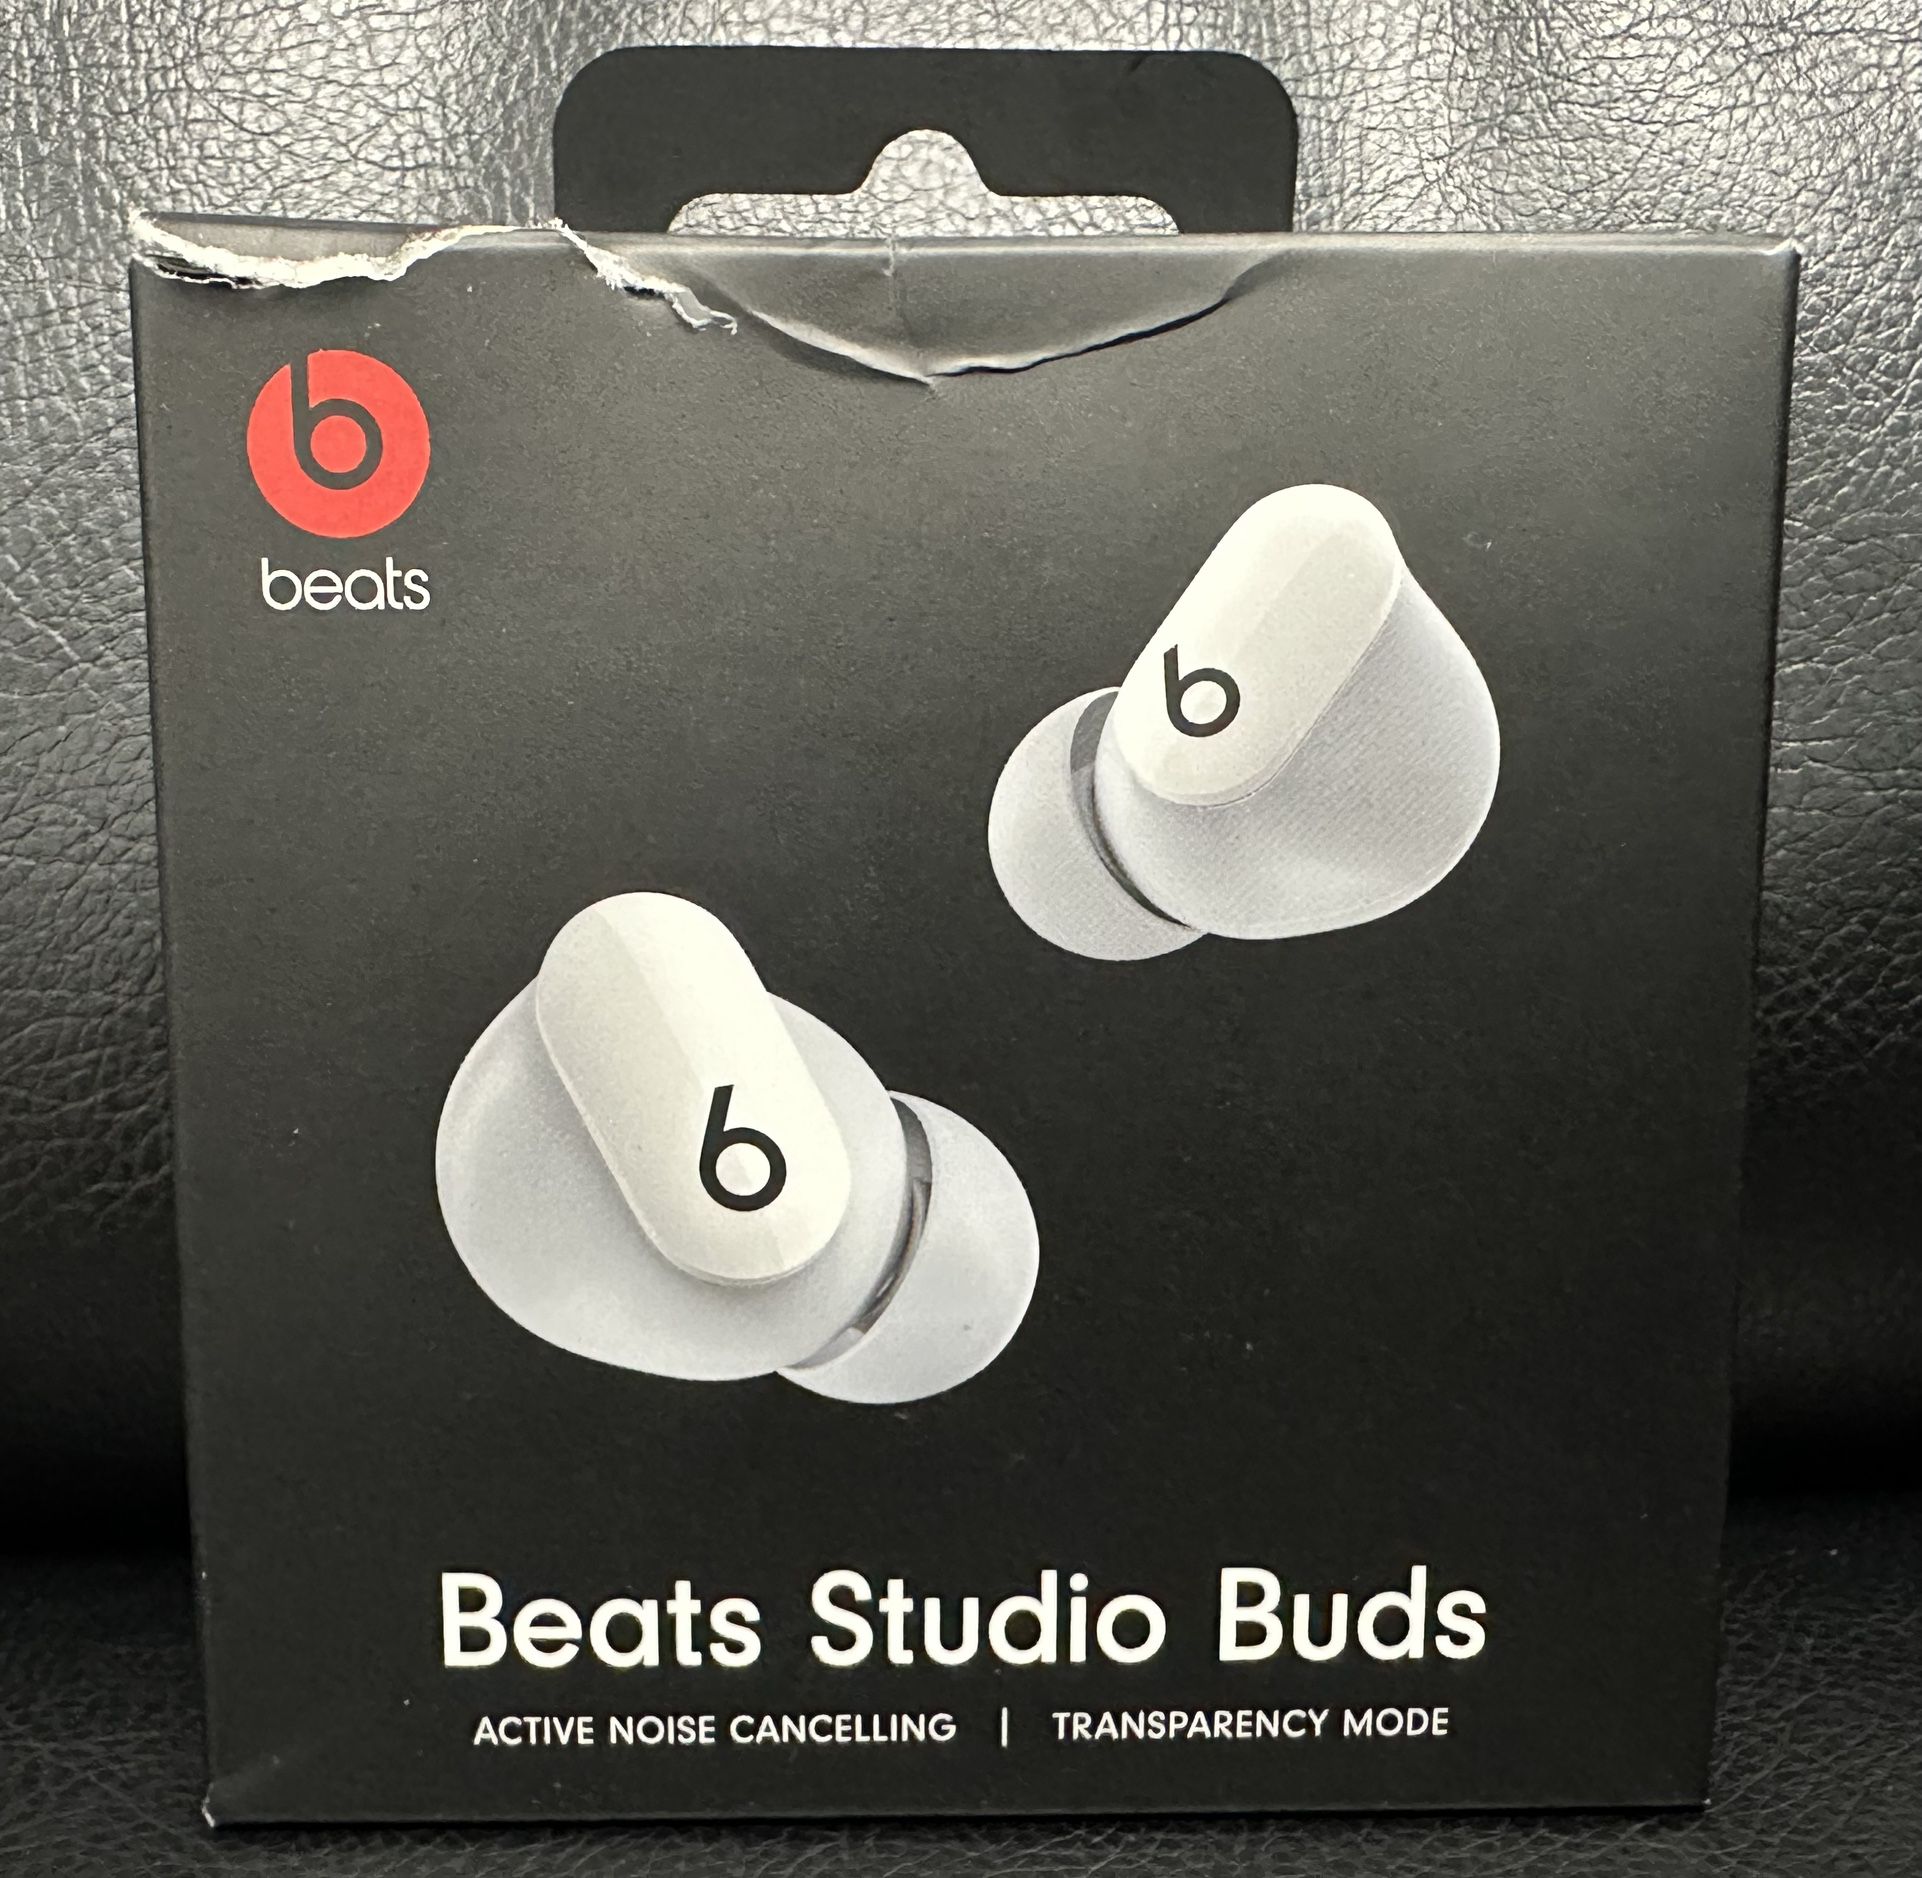 NEW! Beats Studio Buds Totally Wireless Noise Cancelling Earphones - White